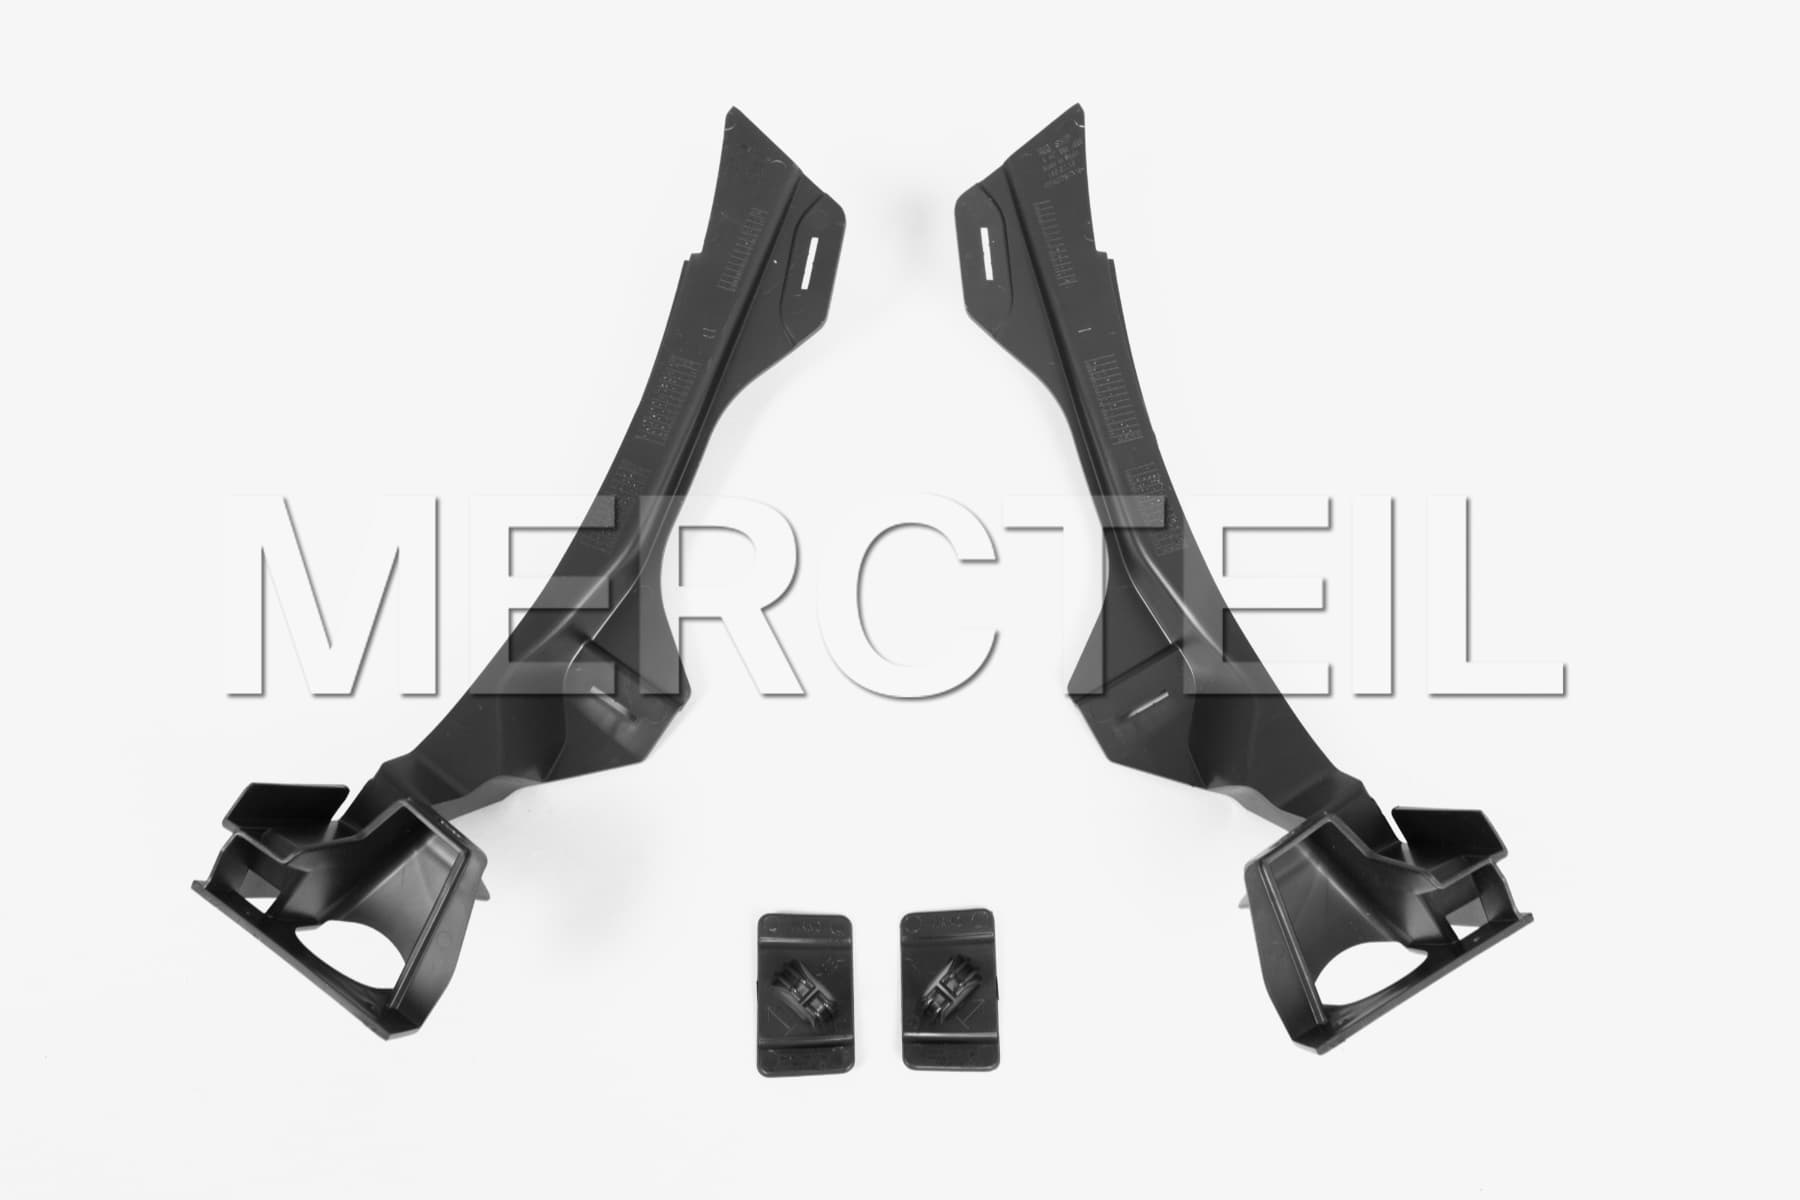 AMG Line Rear Bumper for V-Class (part number:
A4478855000)